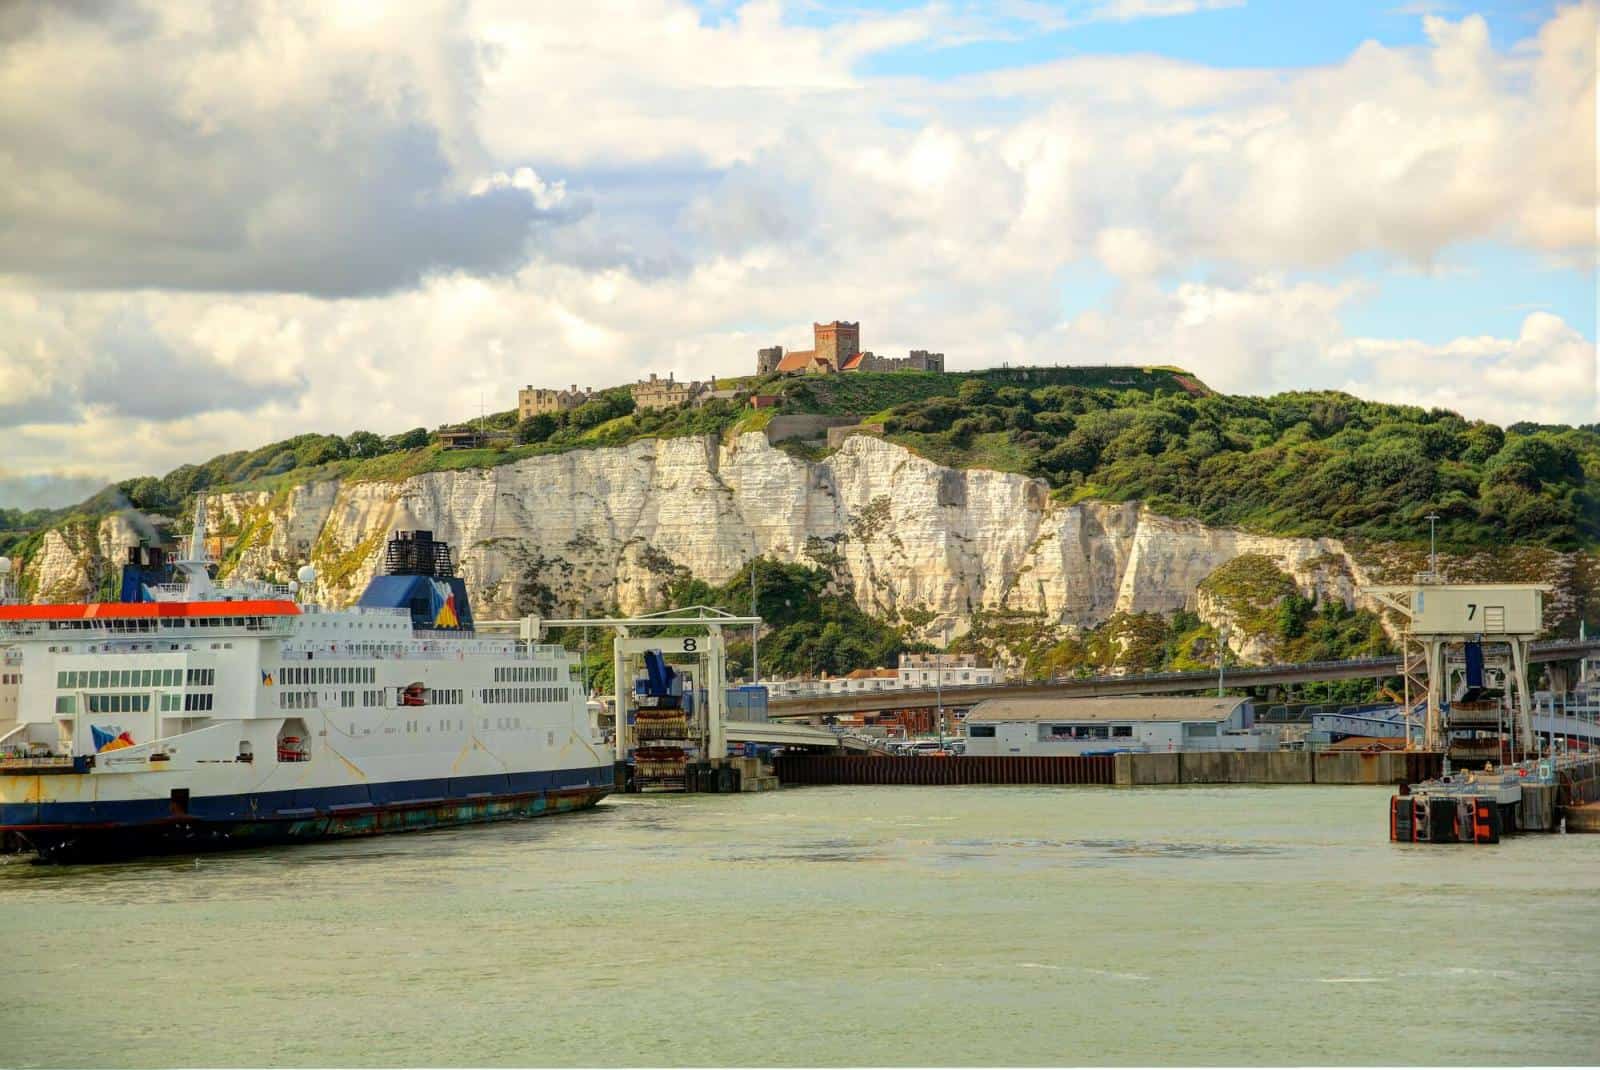 ferry at dover - drive to Disneyland Paris